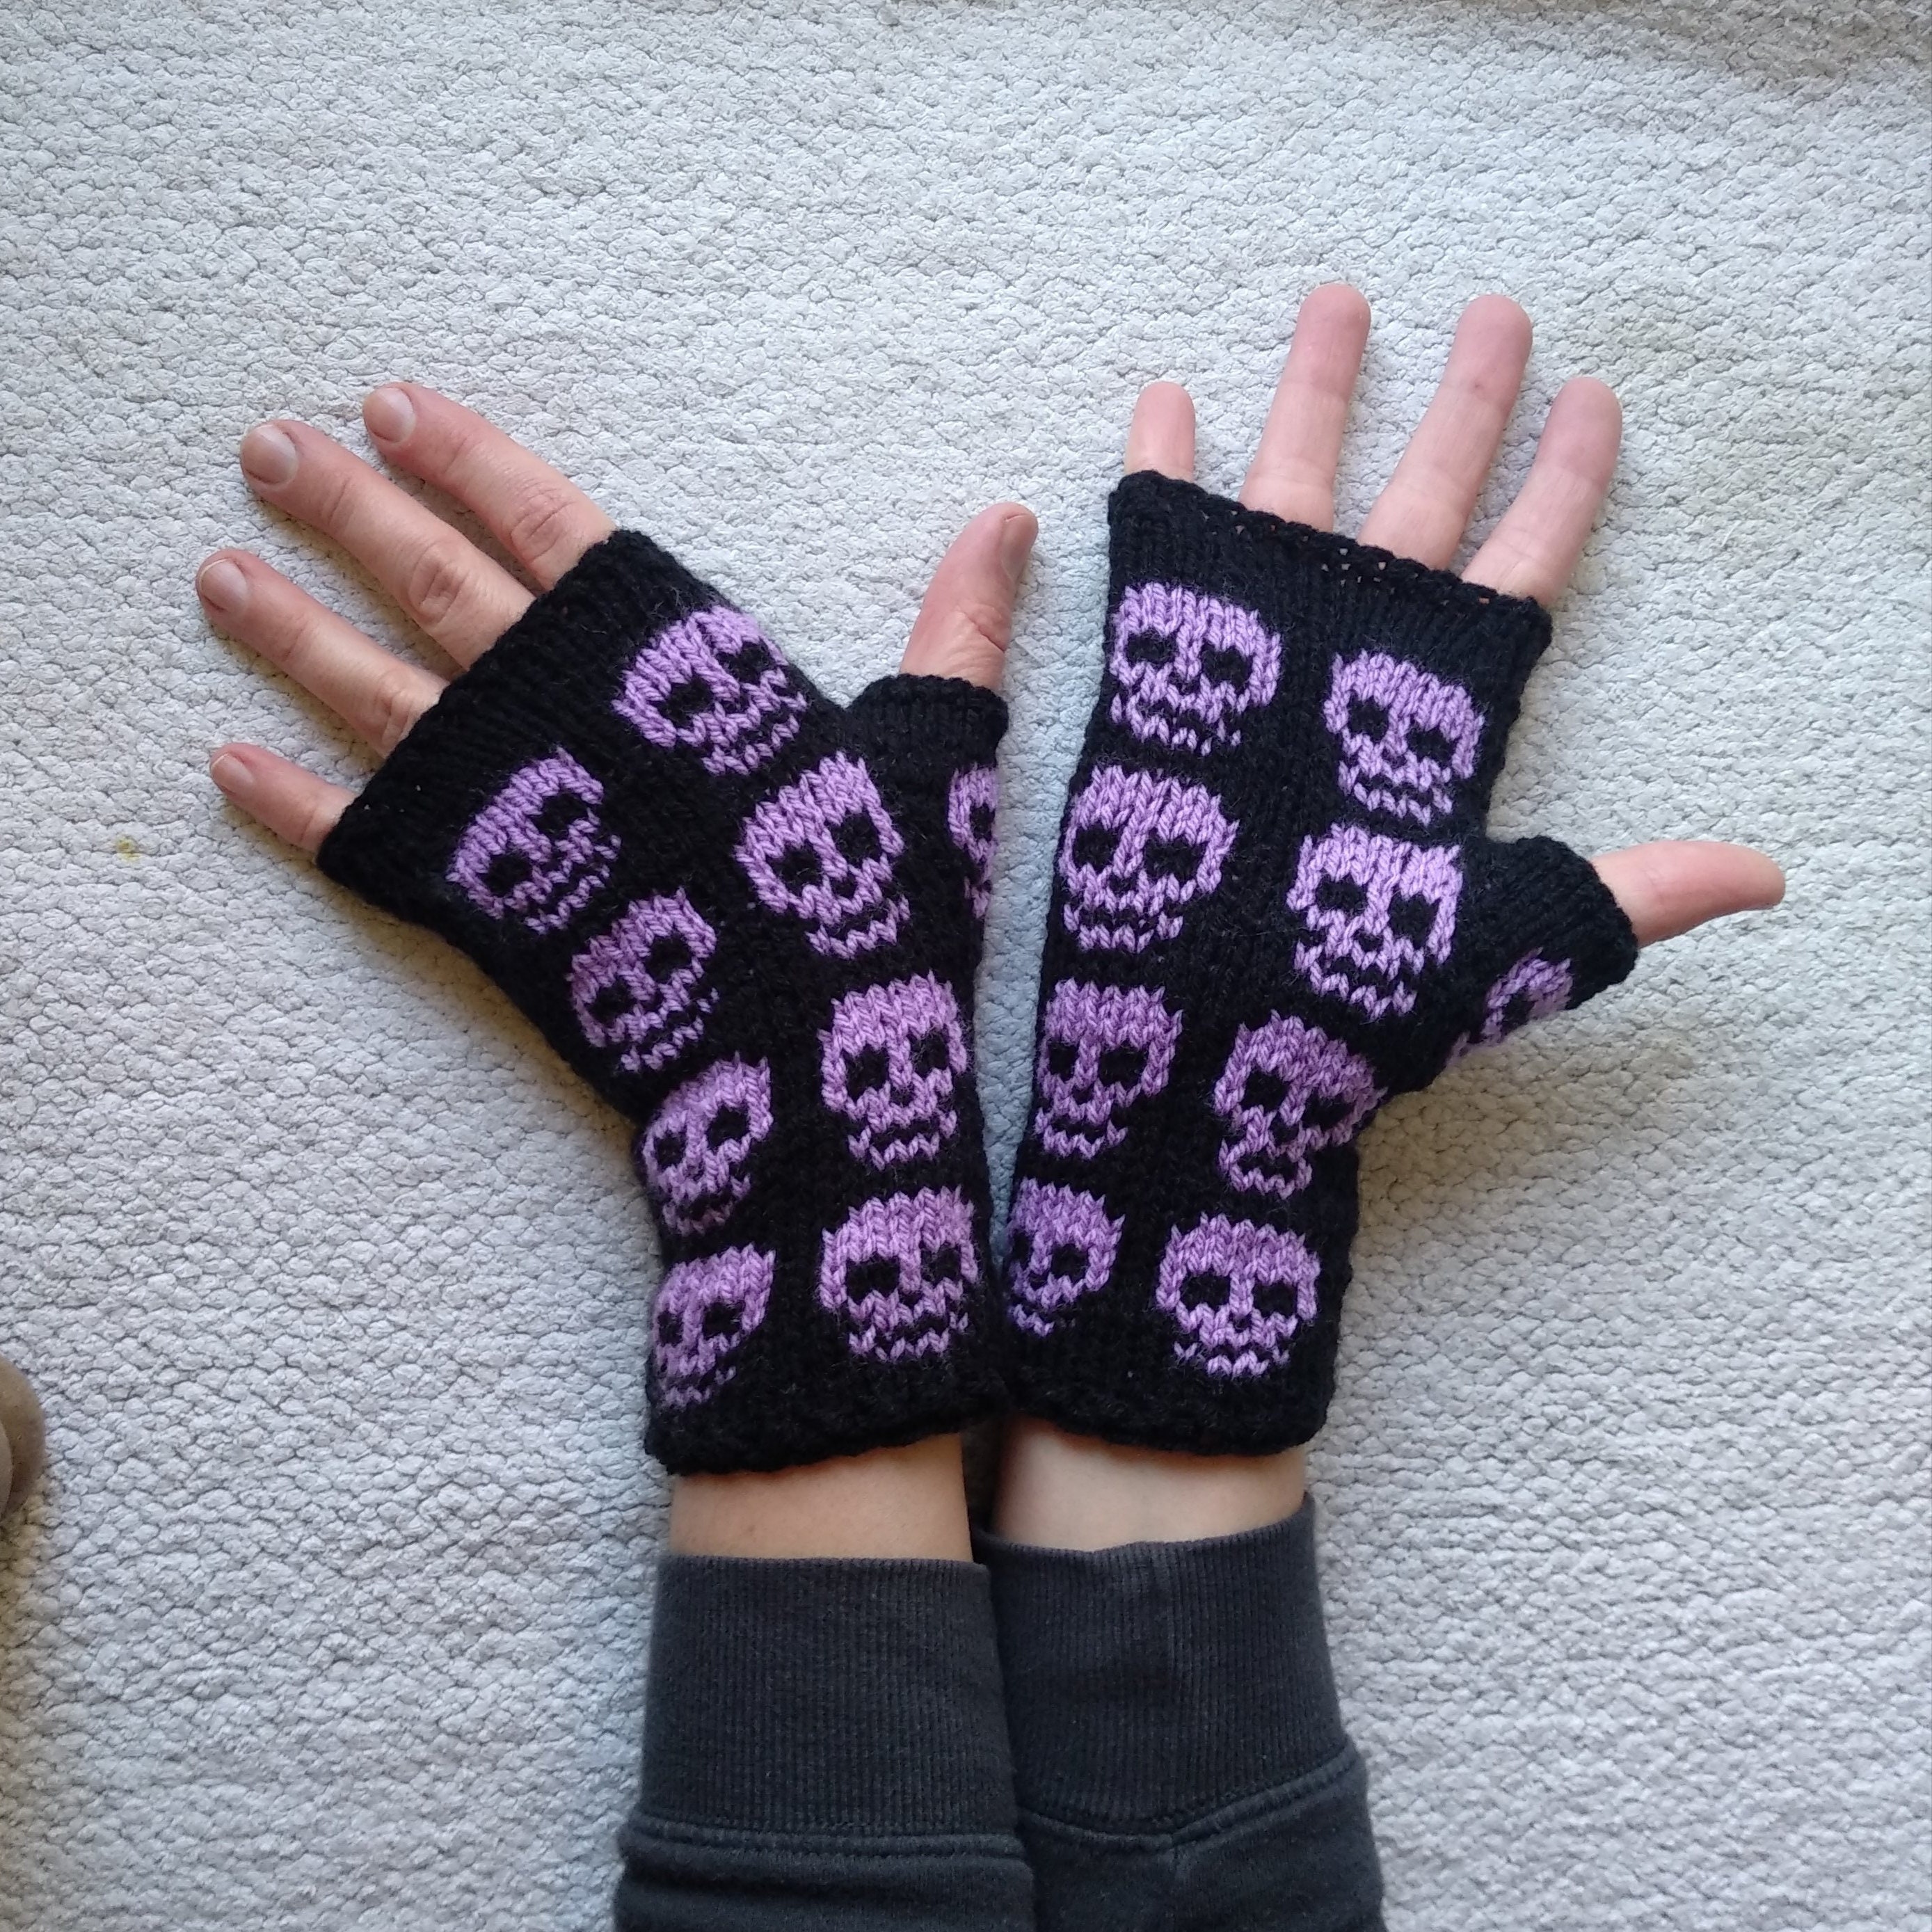 Goth Arm Warmers With Purple Skulls, Emo Fingerless Gloves With